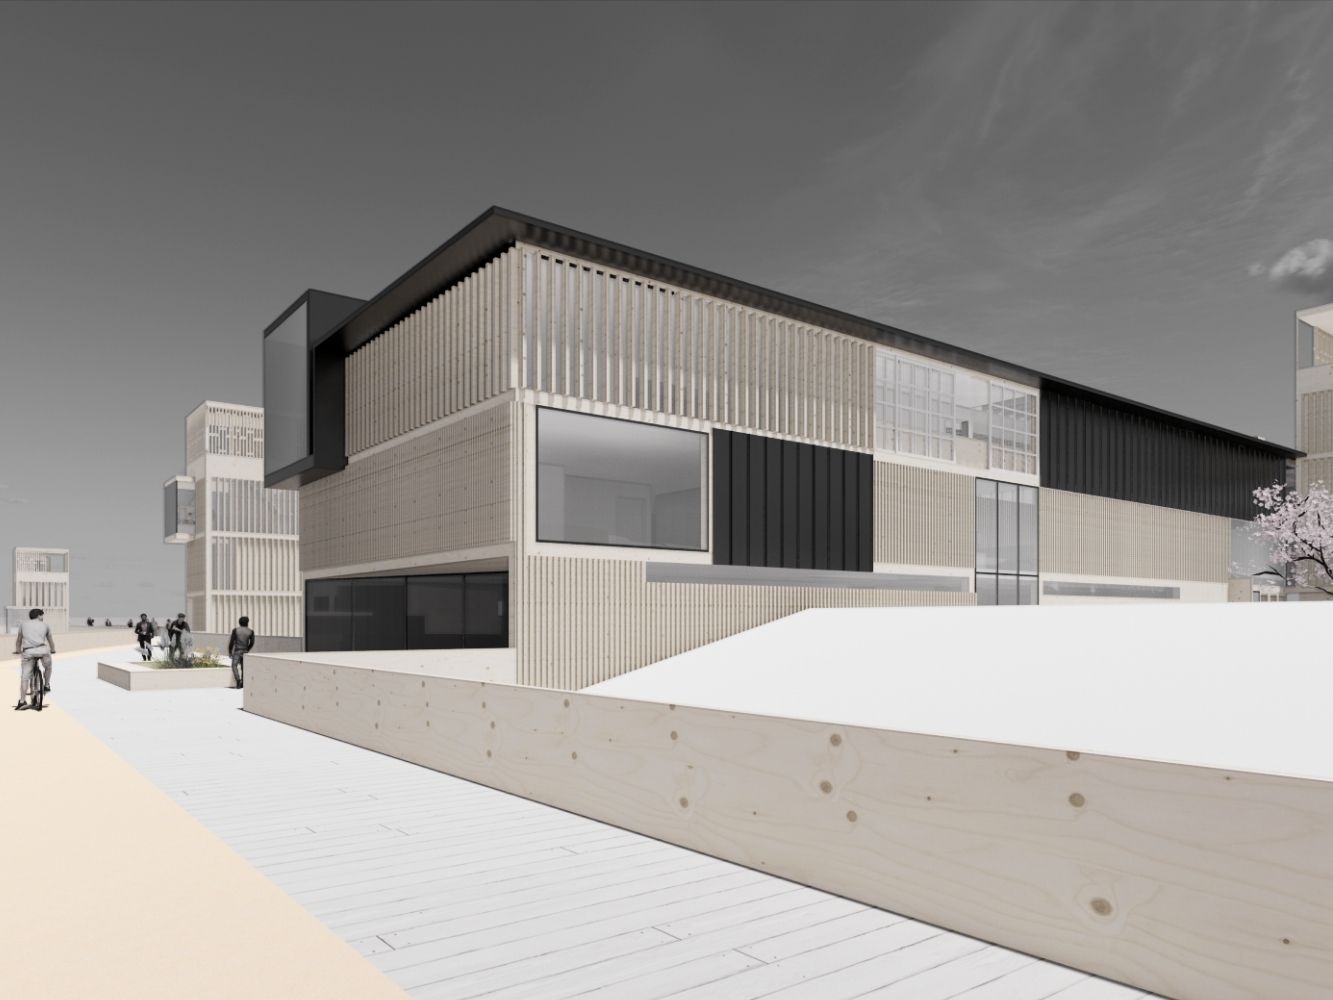 Architectural rendering of exterior building at newly imagined Green Corridor in Torry